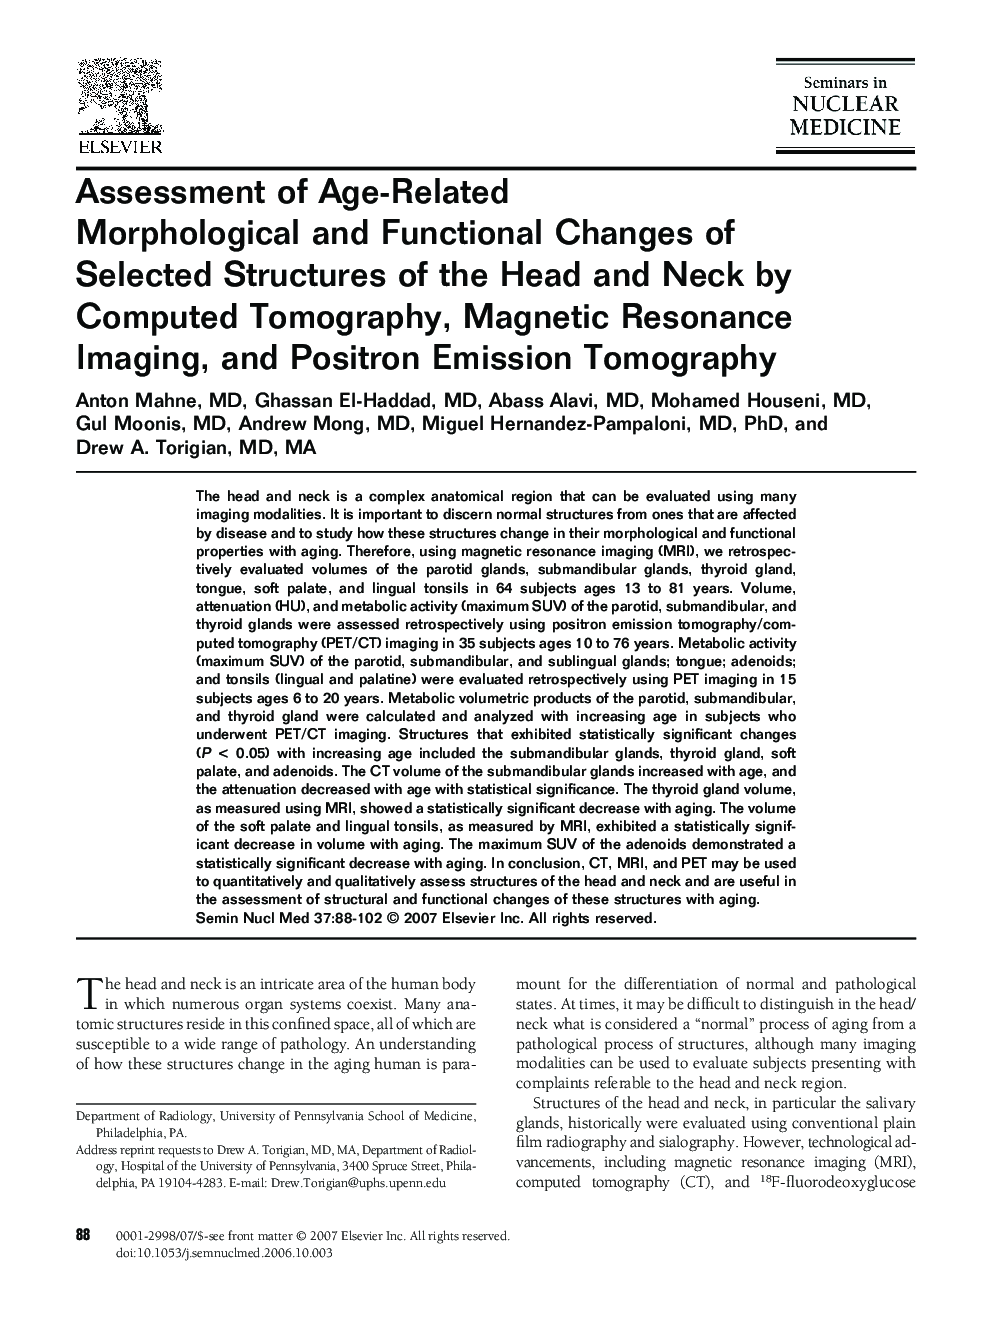 Assessment of Age-Related Morphological and Functional Changes of Selected Structures of the Head and Neck by Computed Tomography, Magnetic Resonance Imaging, and Positron Emission Tomography